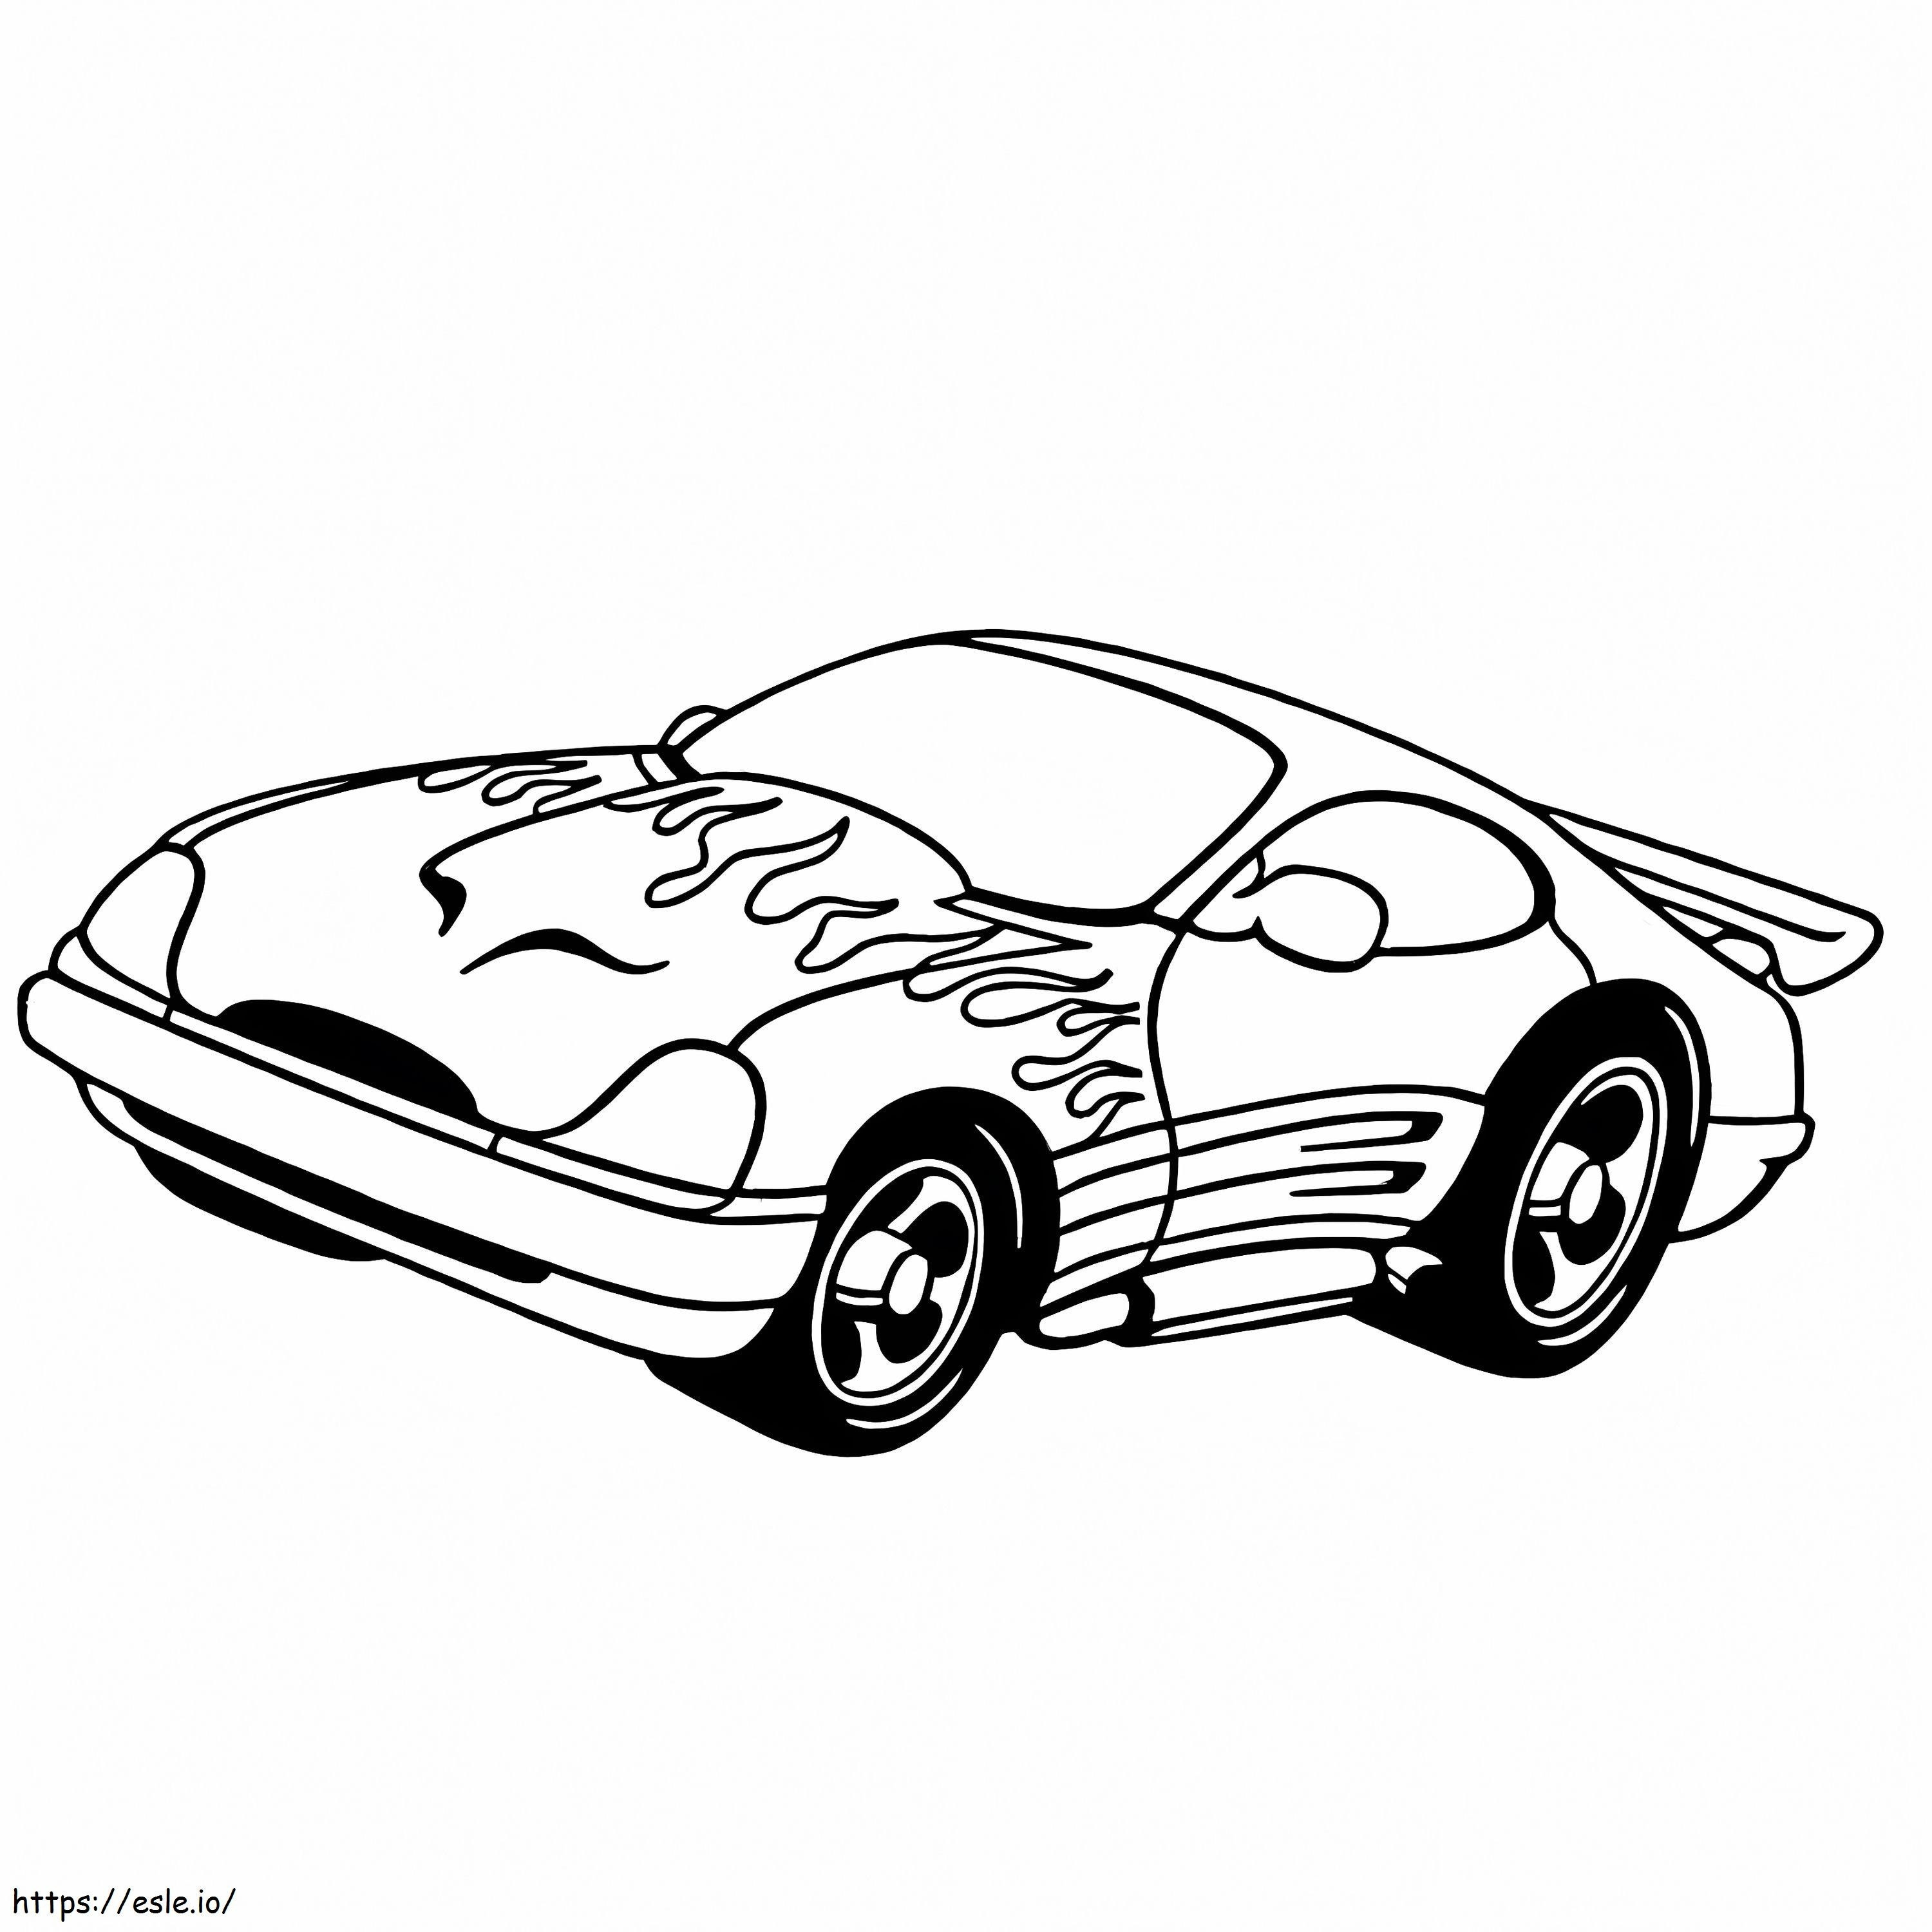 Race Car 10 coloring page